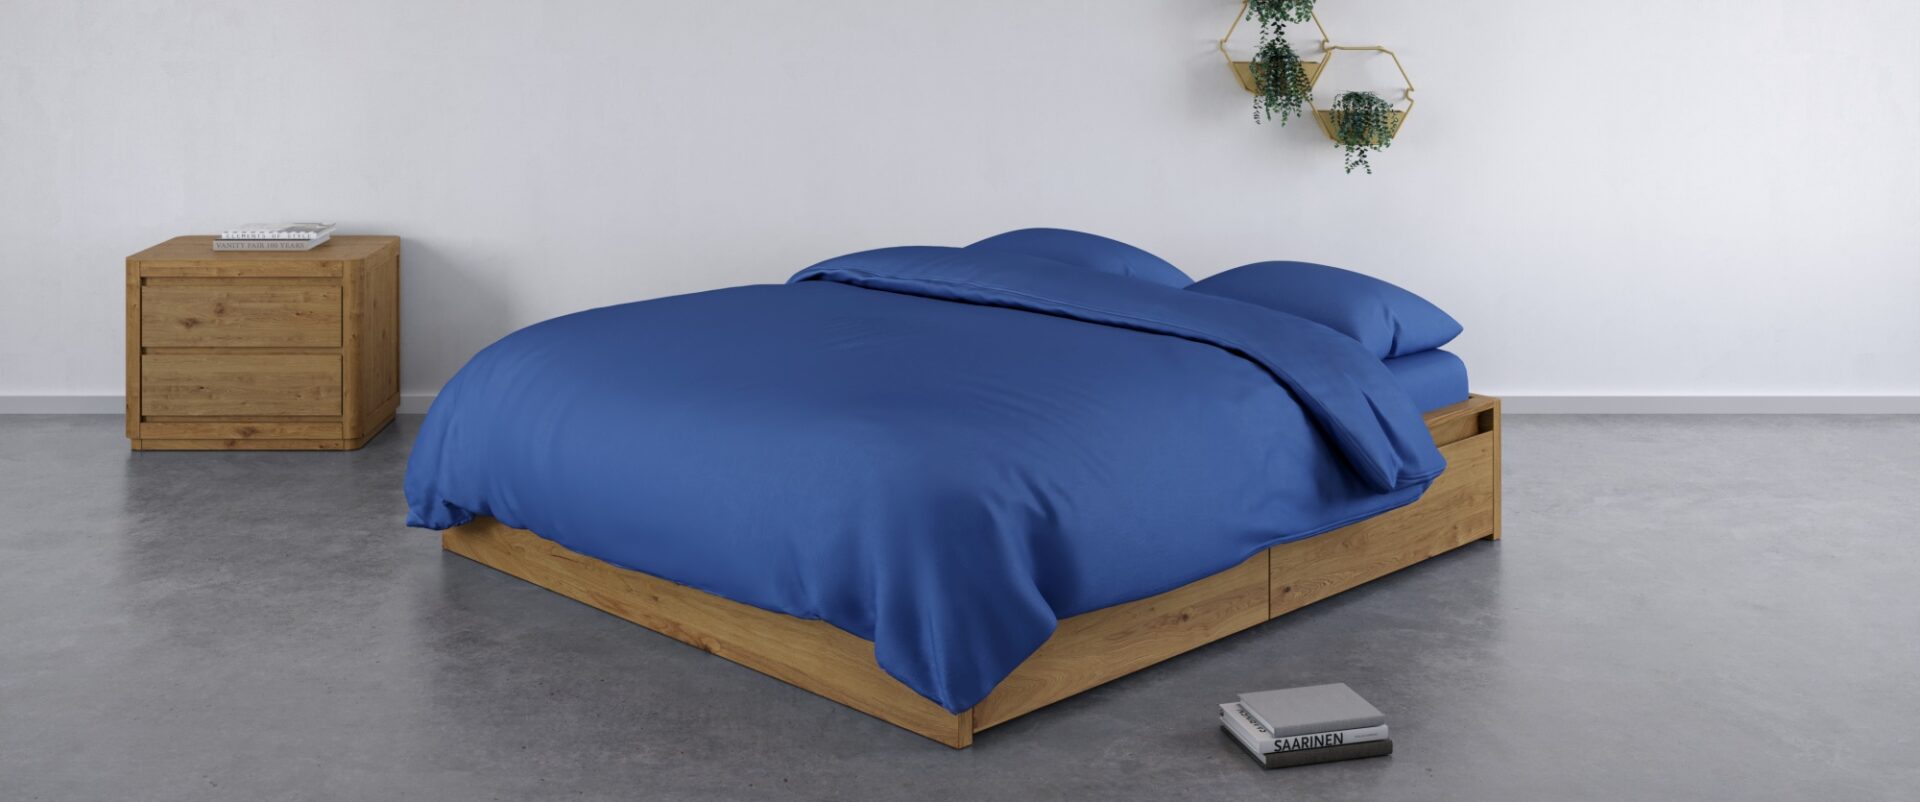 bamboo bedding complete set navy color